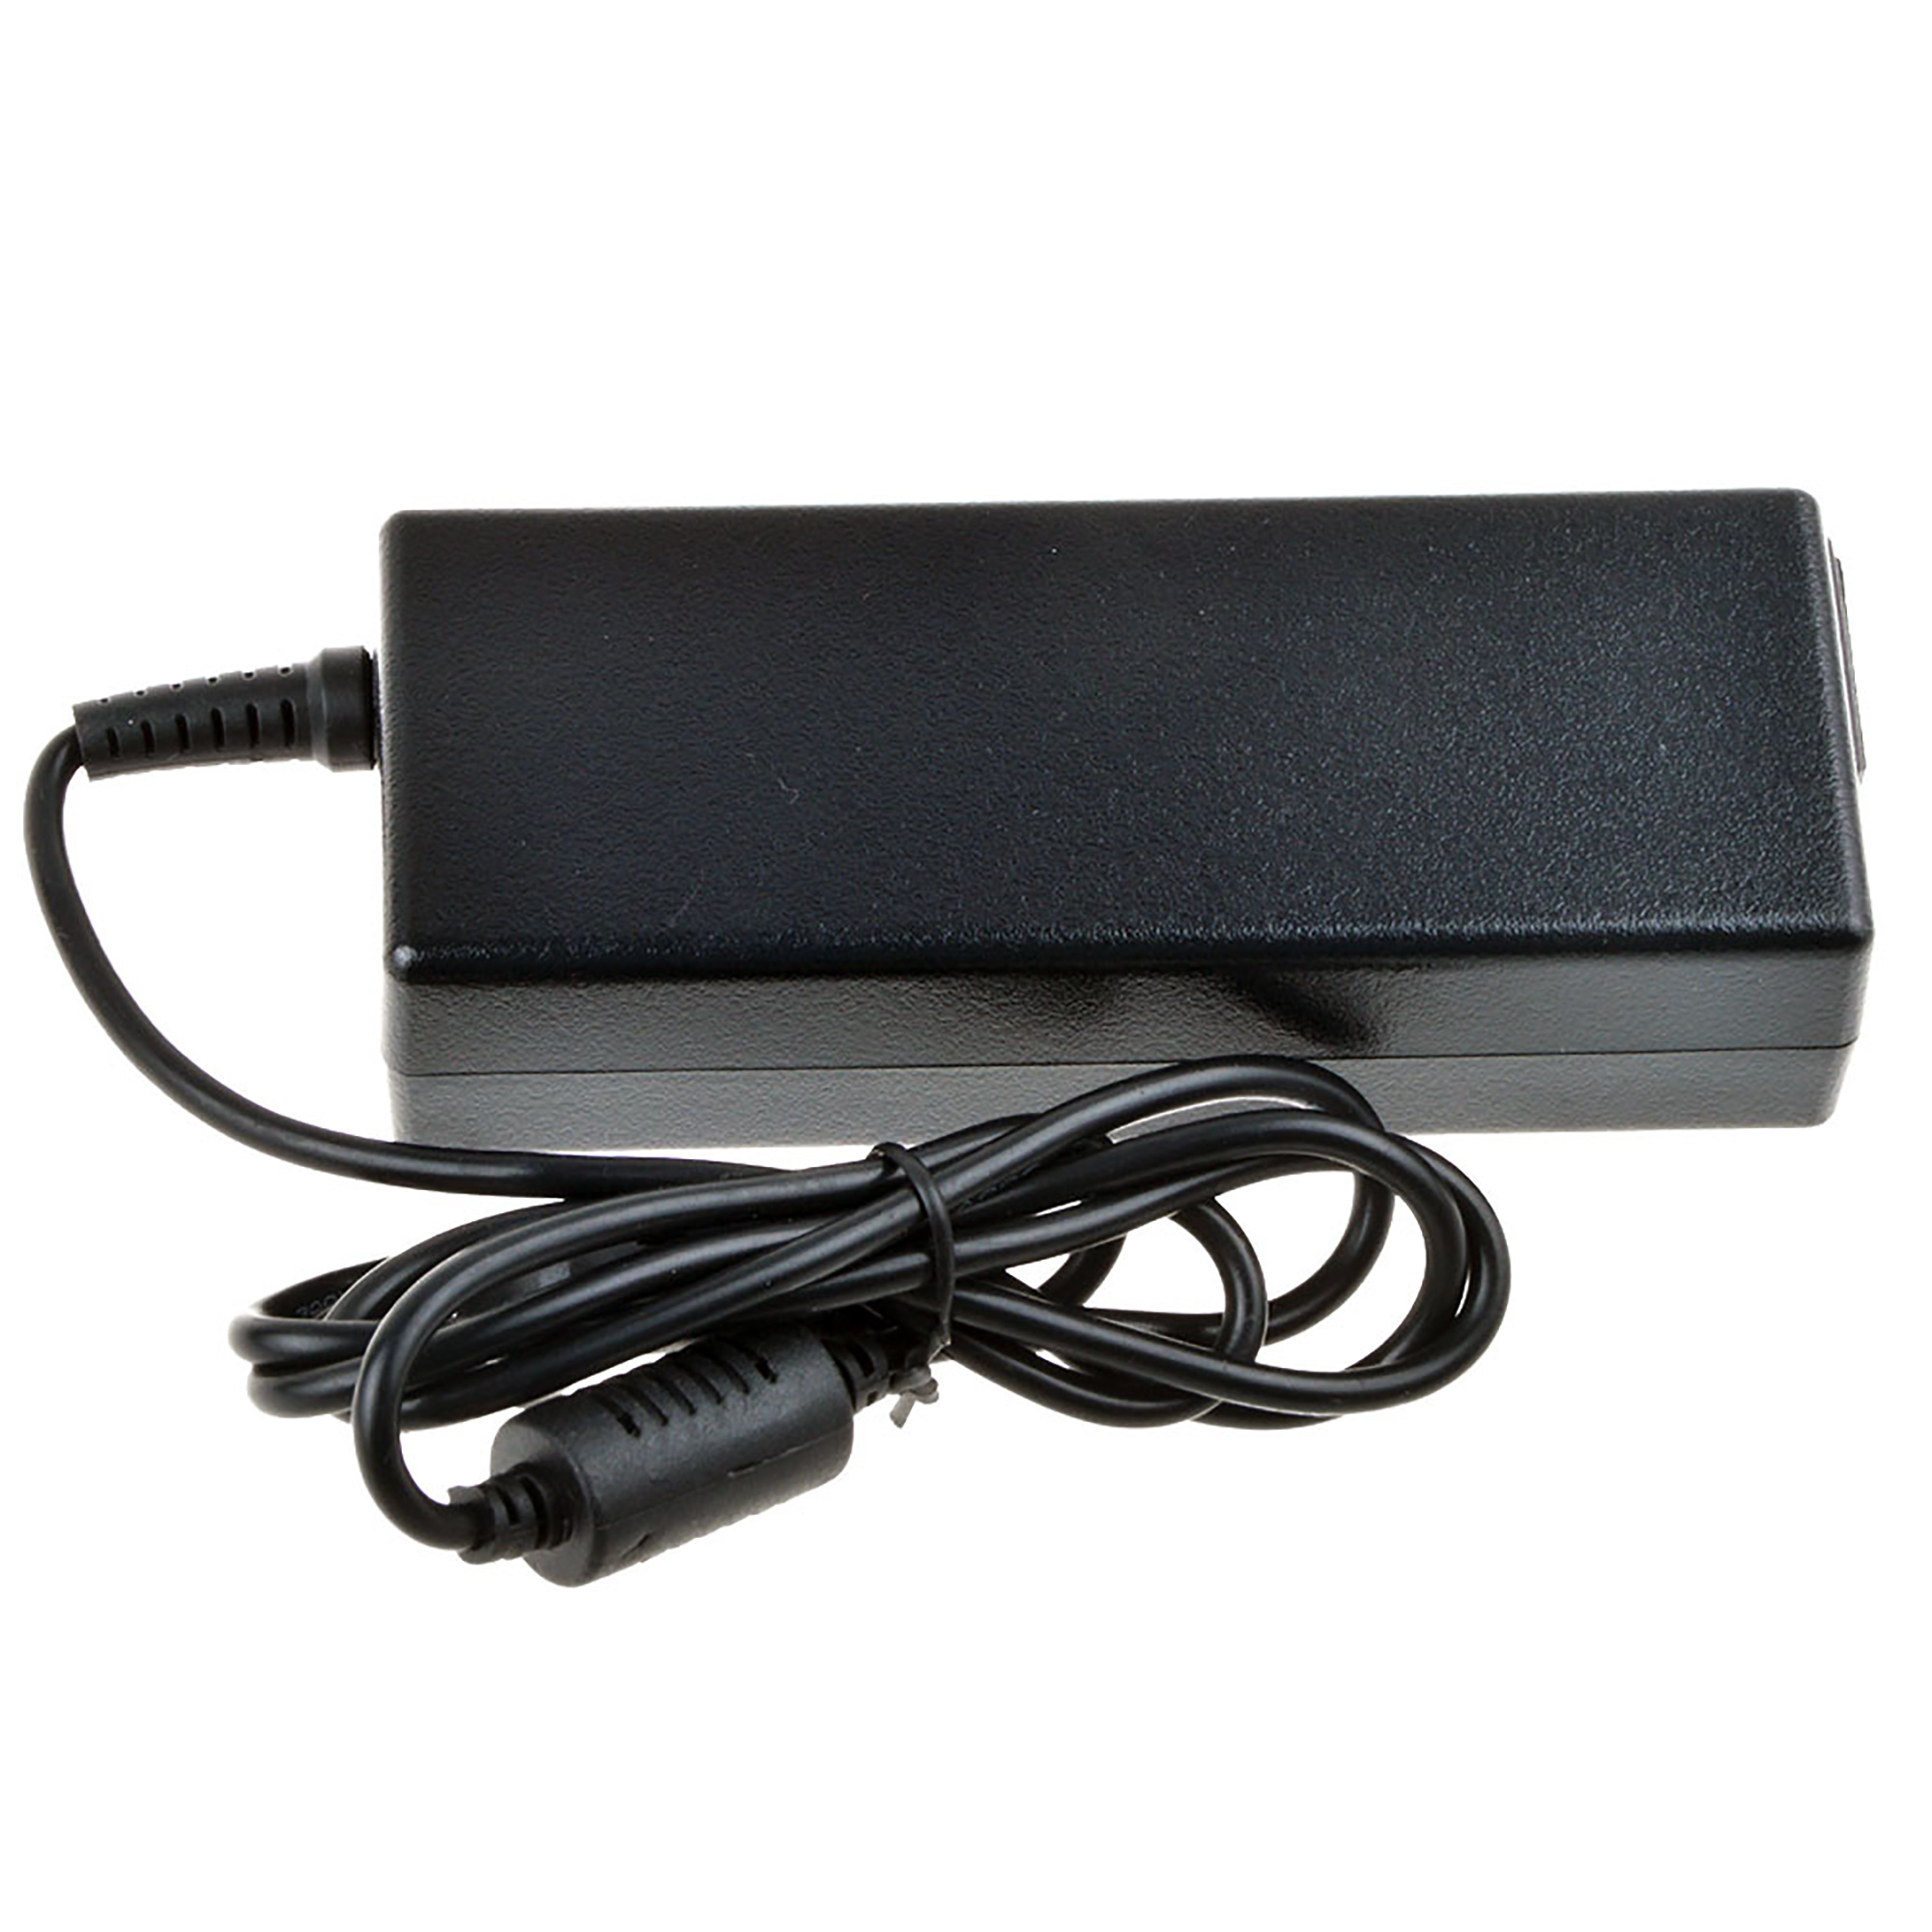 PKPOWER AC Adapter Replacement for Vizio VSB210WS Sound Bar Speaker Wireless Subwoofer Power Supply - image 5 of 5